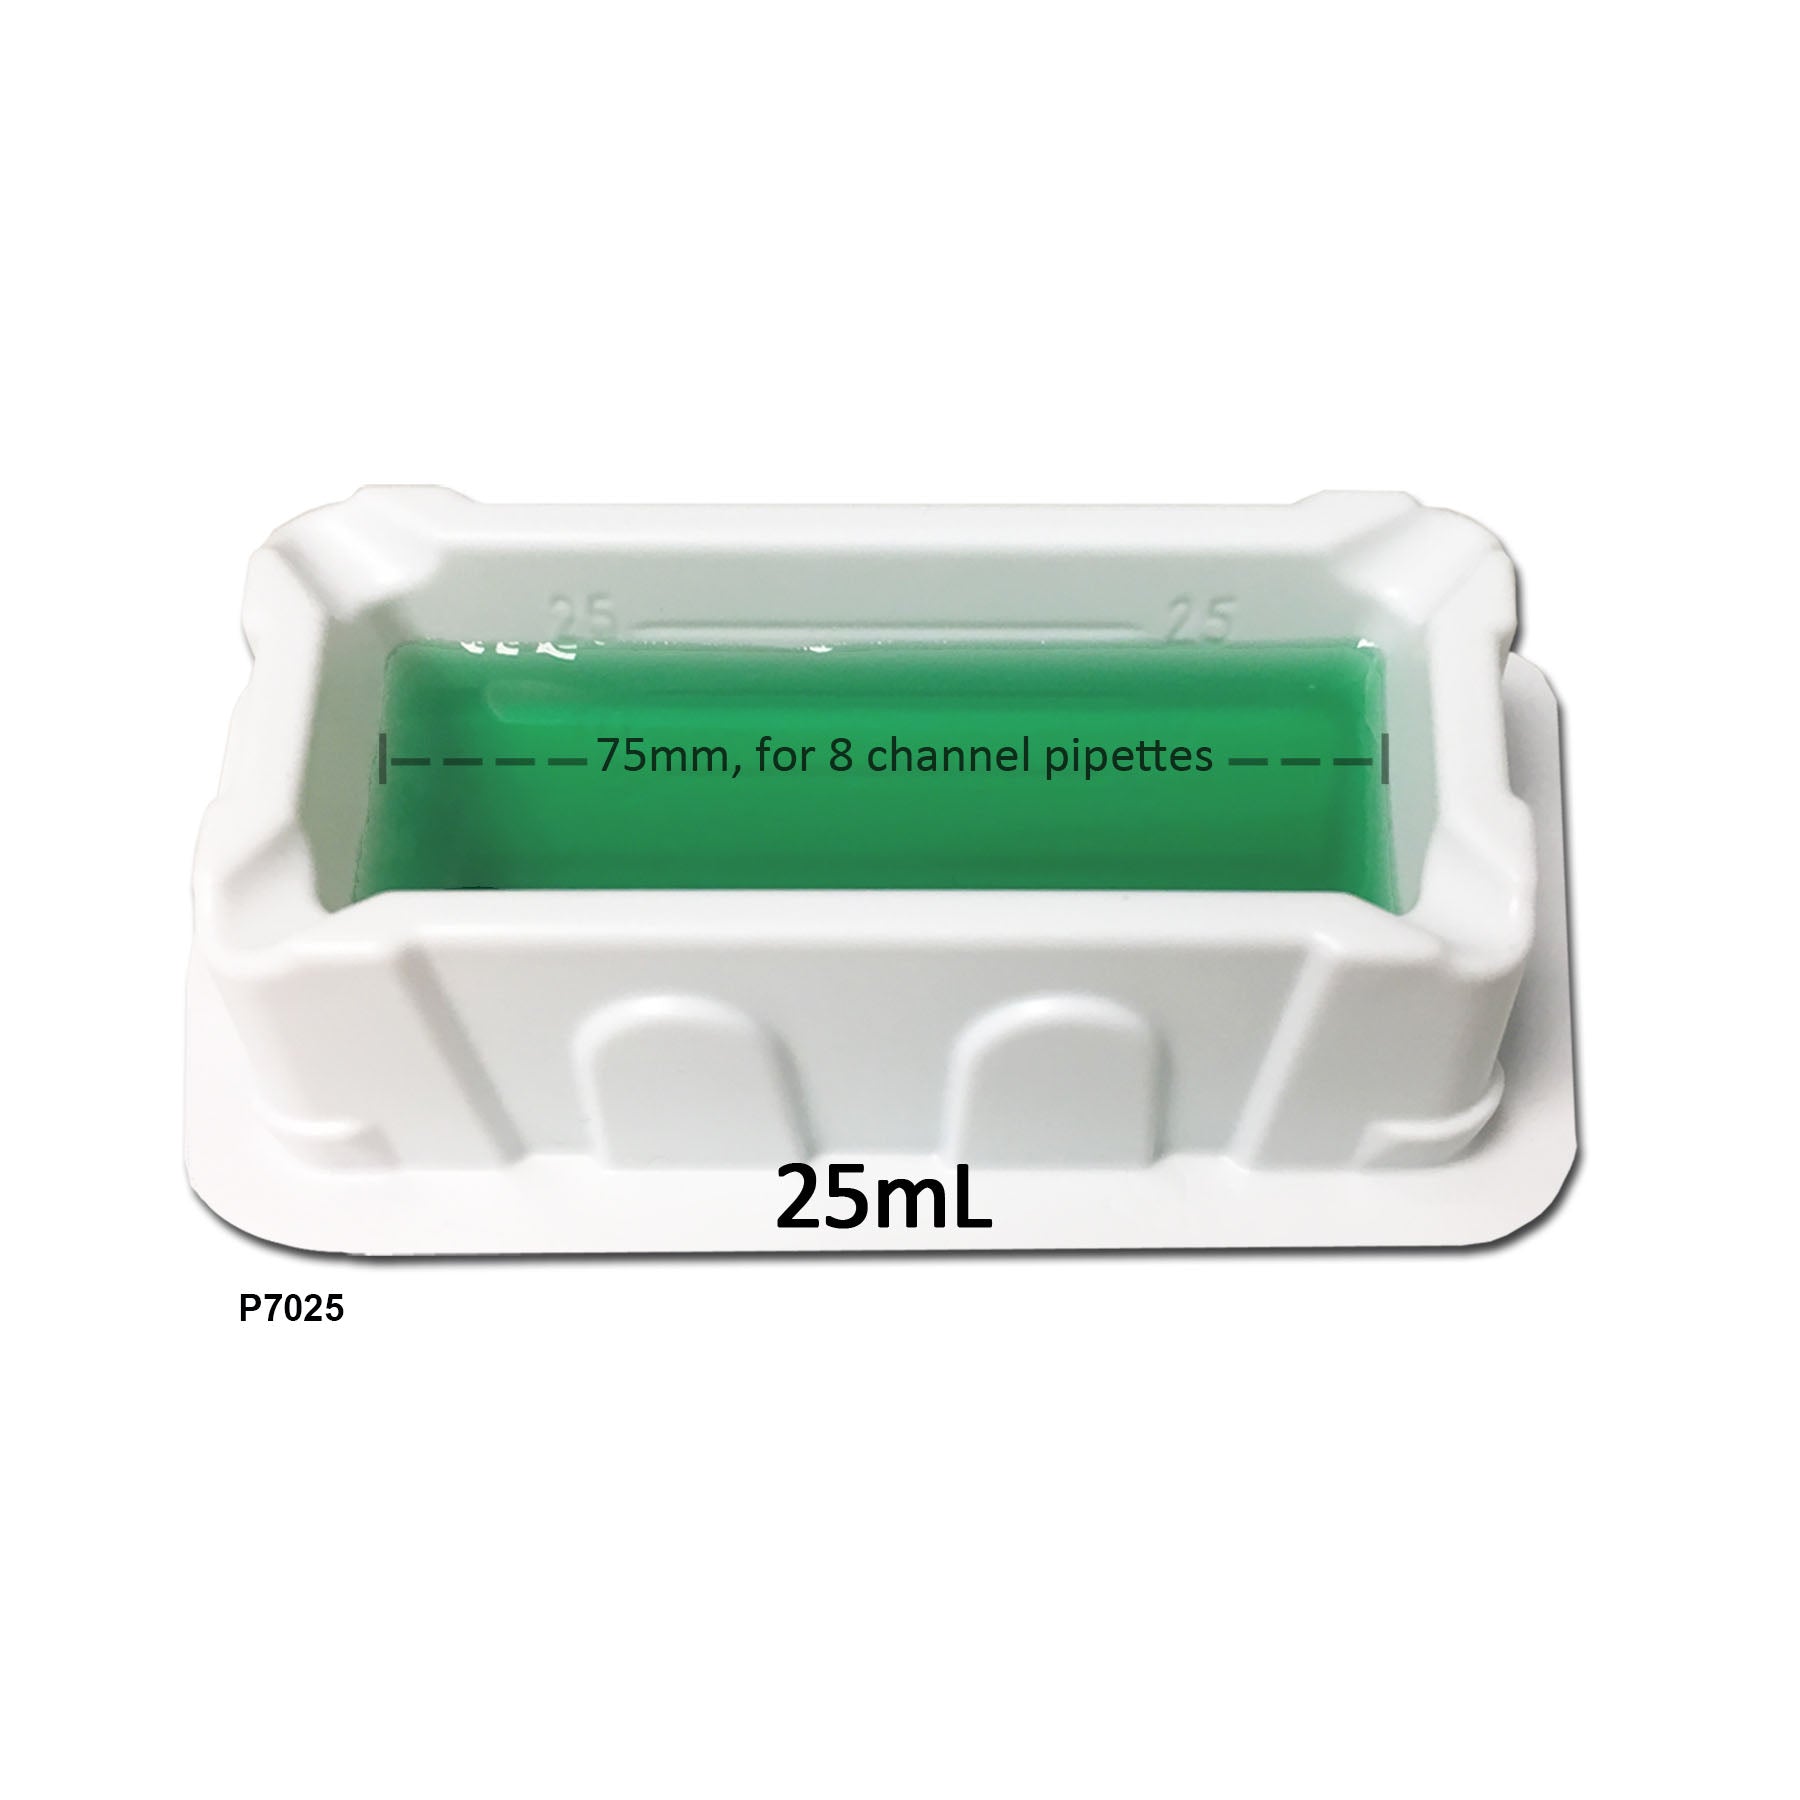 MTC Bio P7025-1S, Aspir-8 Solution Reservoir, 25ml, 8-Channel Only, Sterile, Individually Wrapped, 100/cs